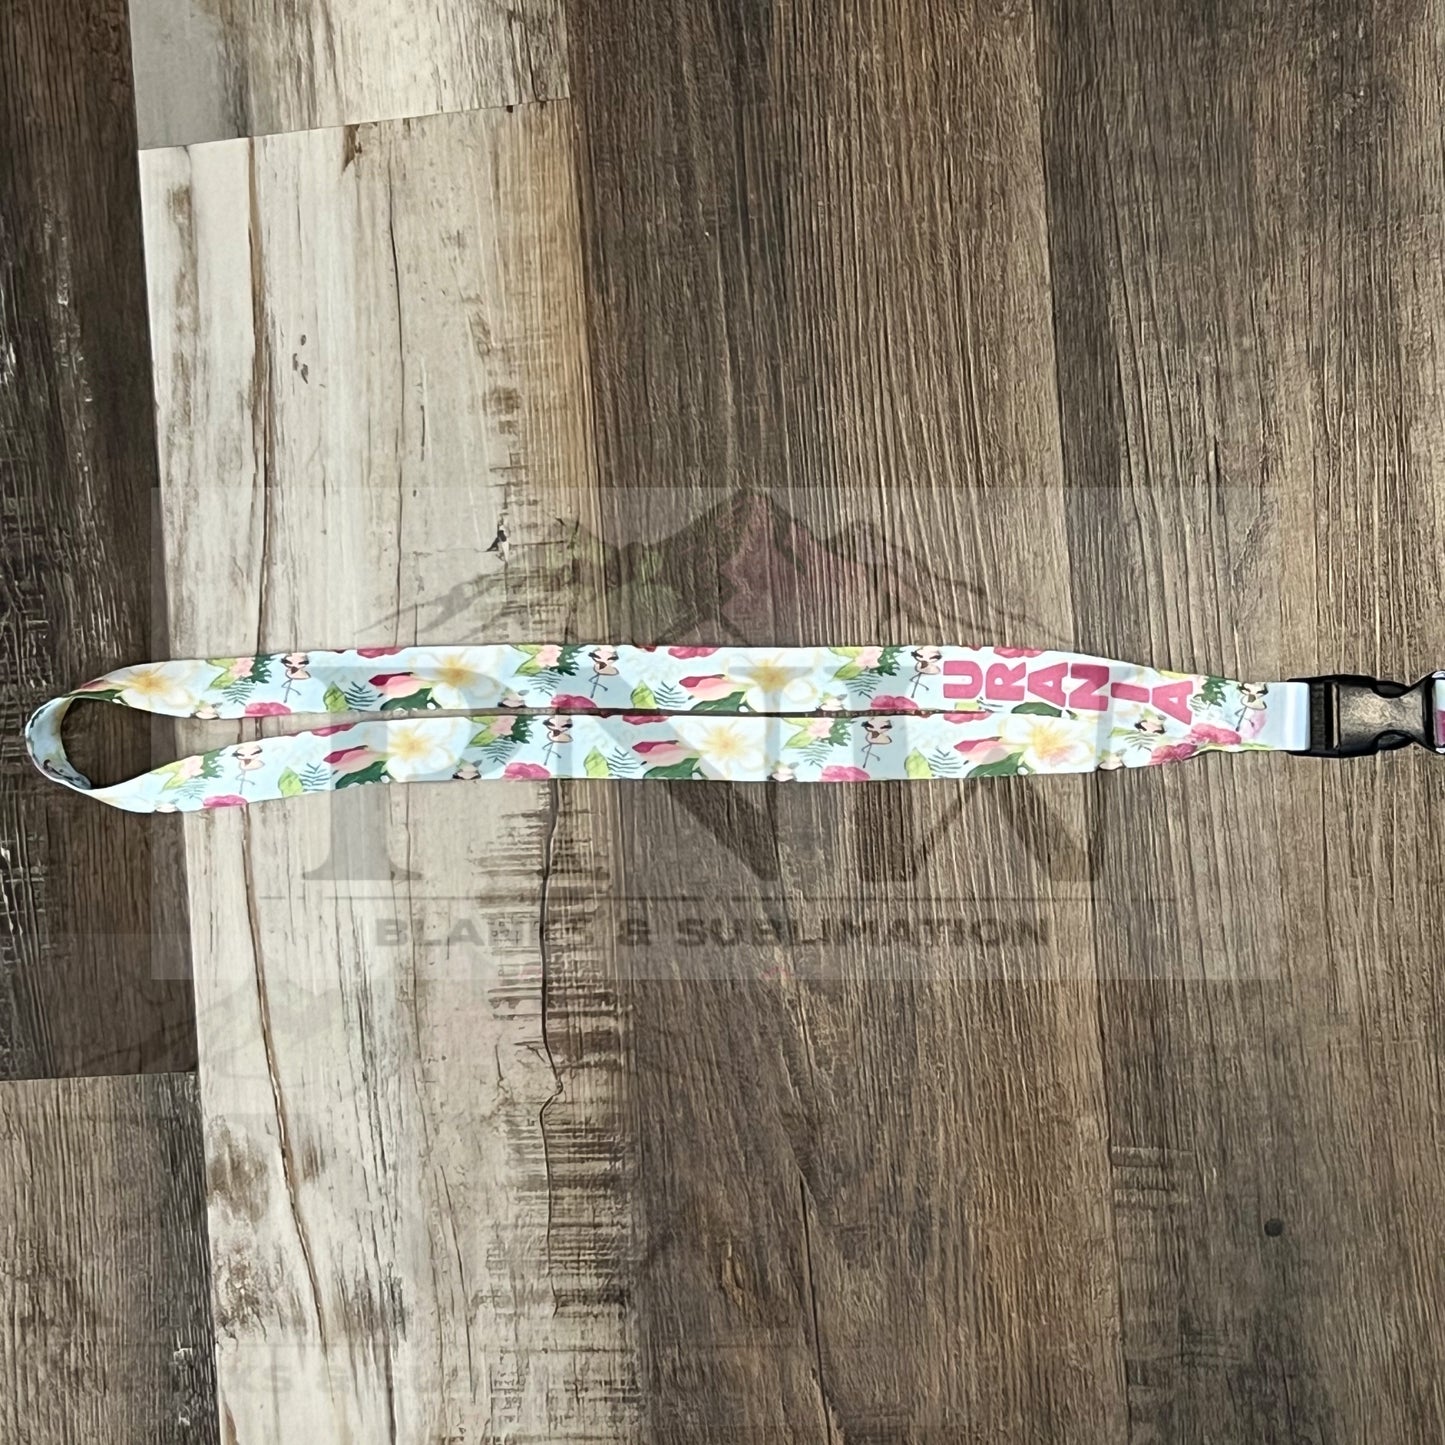 Neck Lanyard Packs | Sublimation | Ships from TN | Volume Pricing